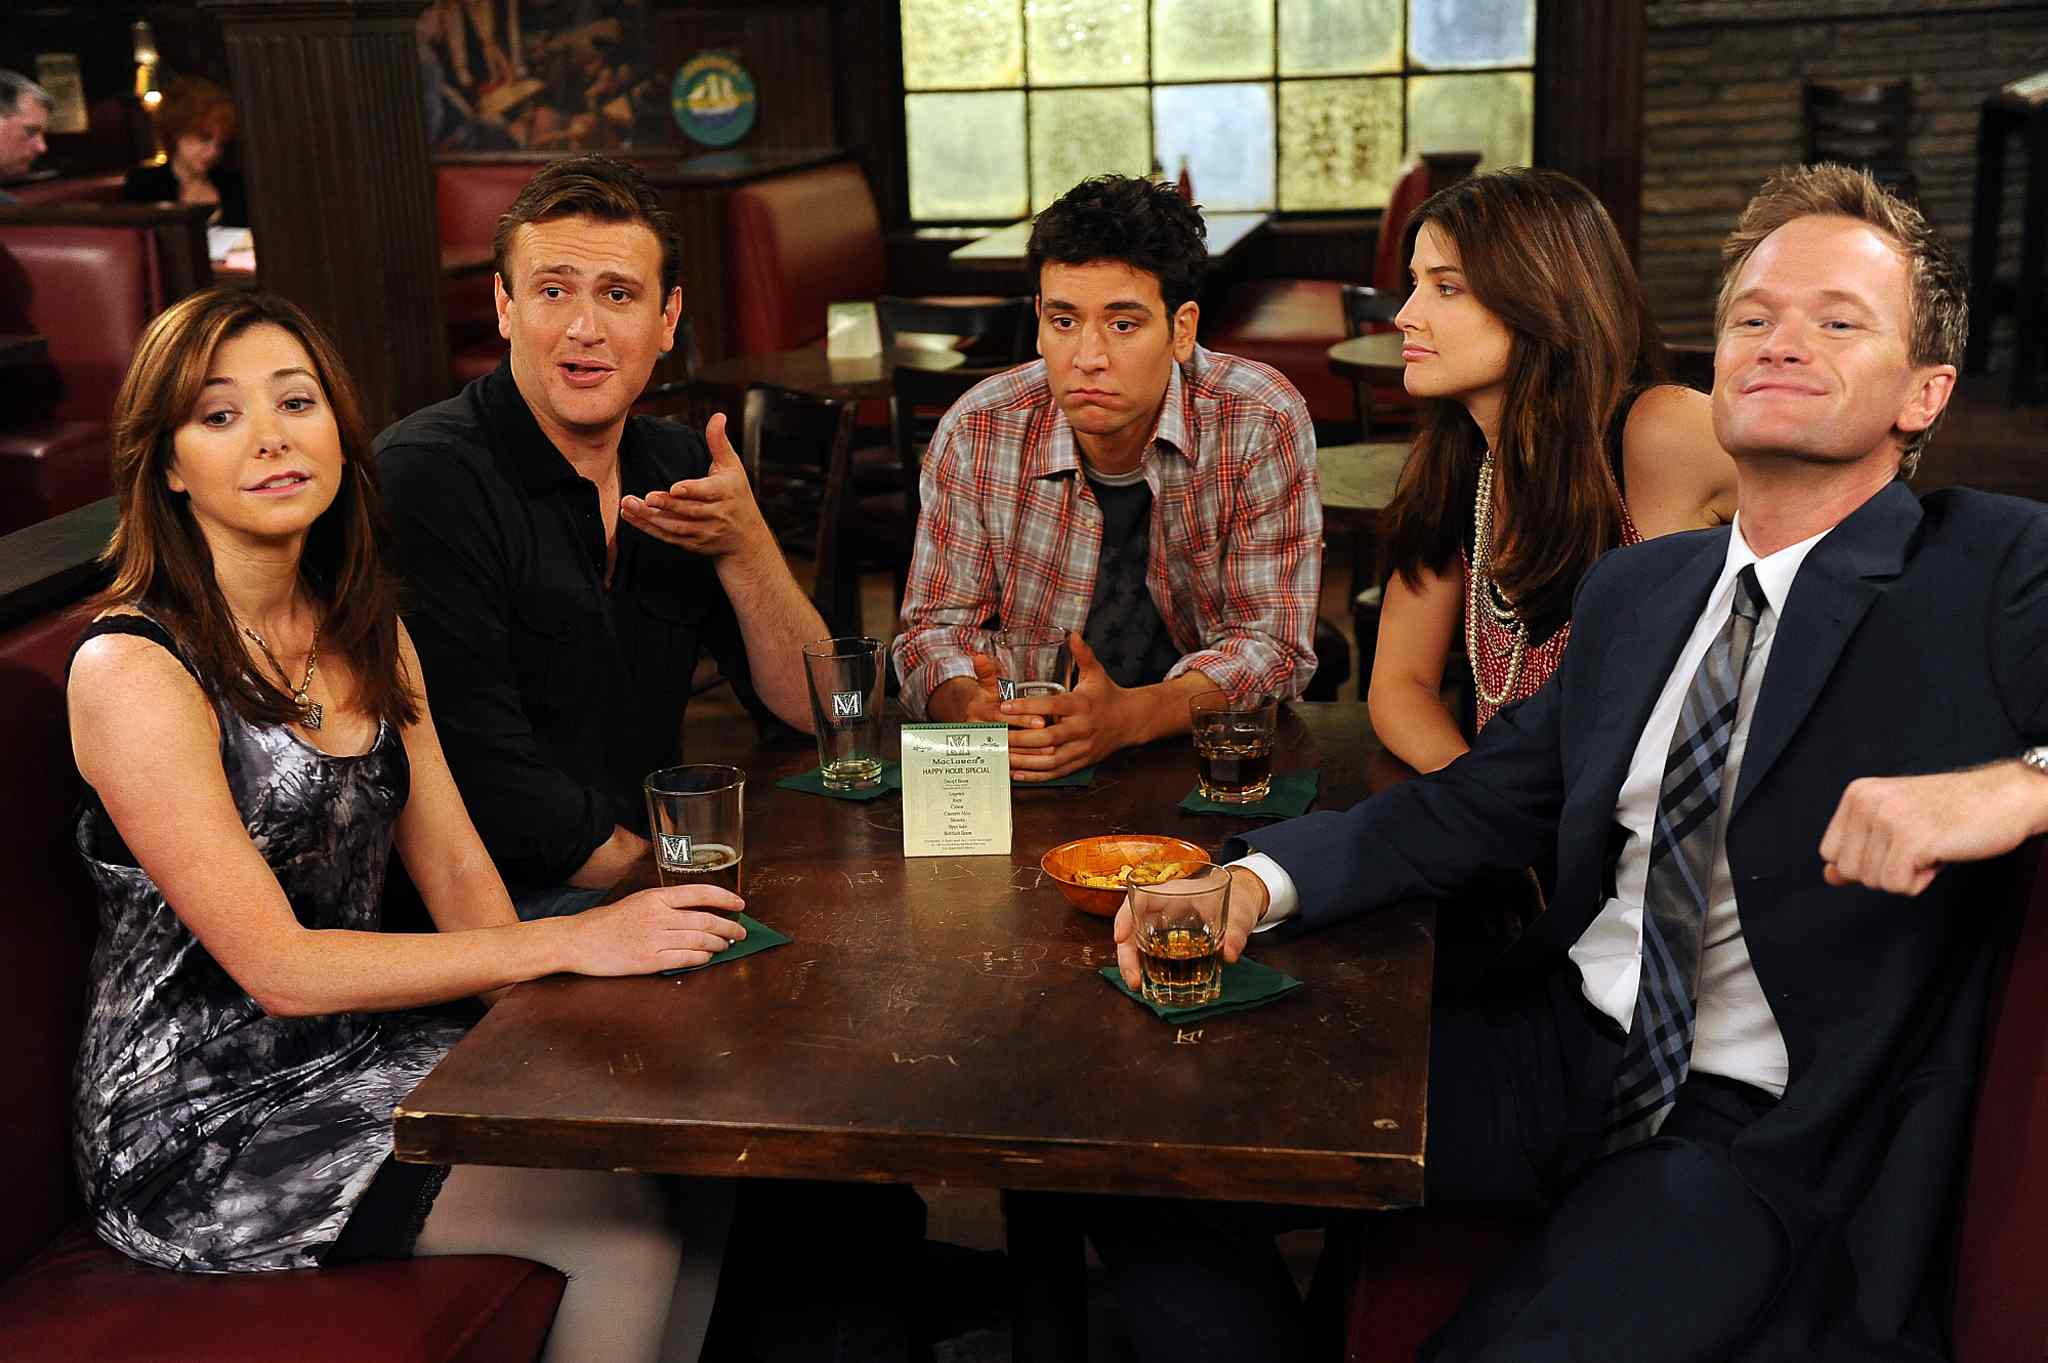 QUIZ: Show how much you know about How I Met Your Mother